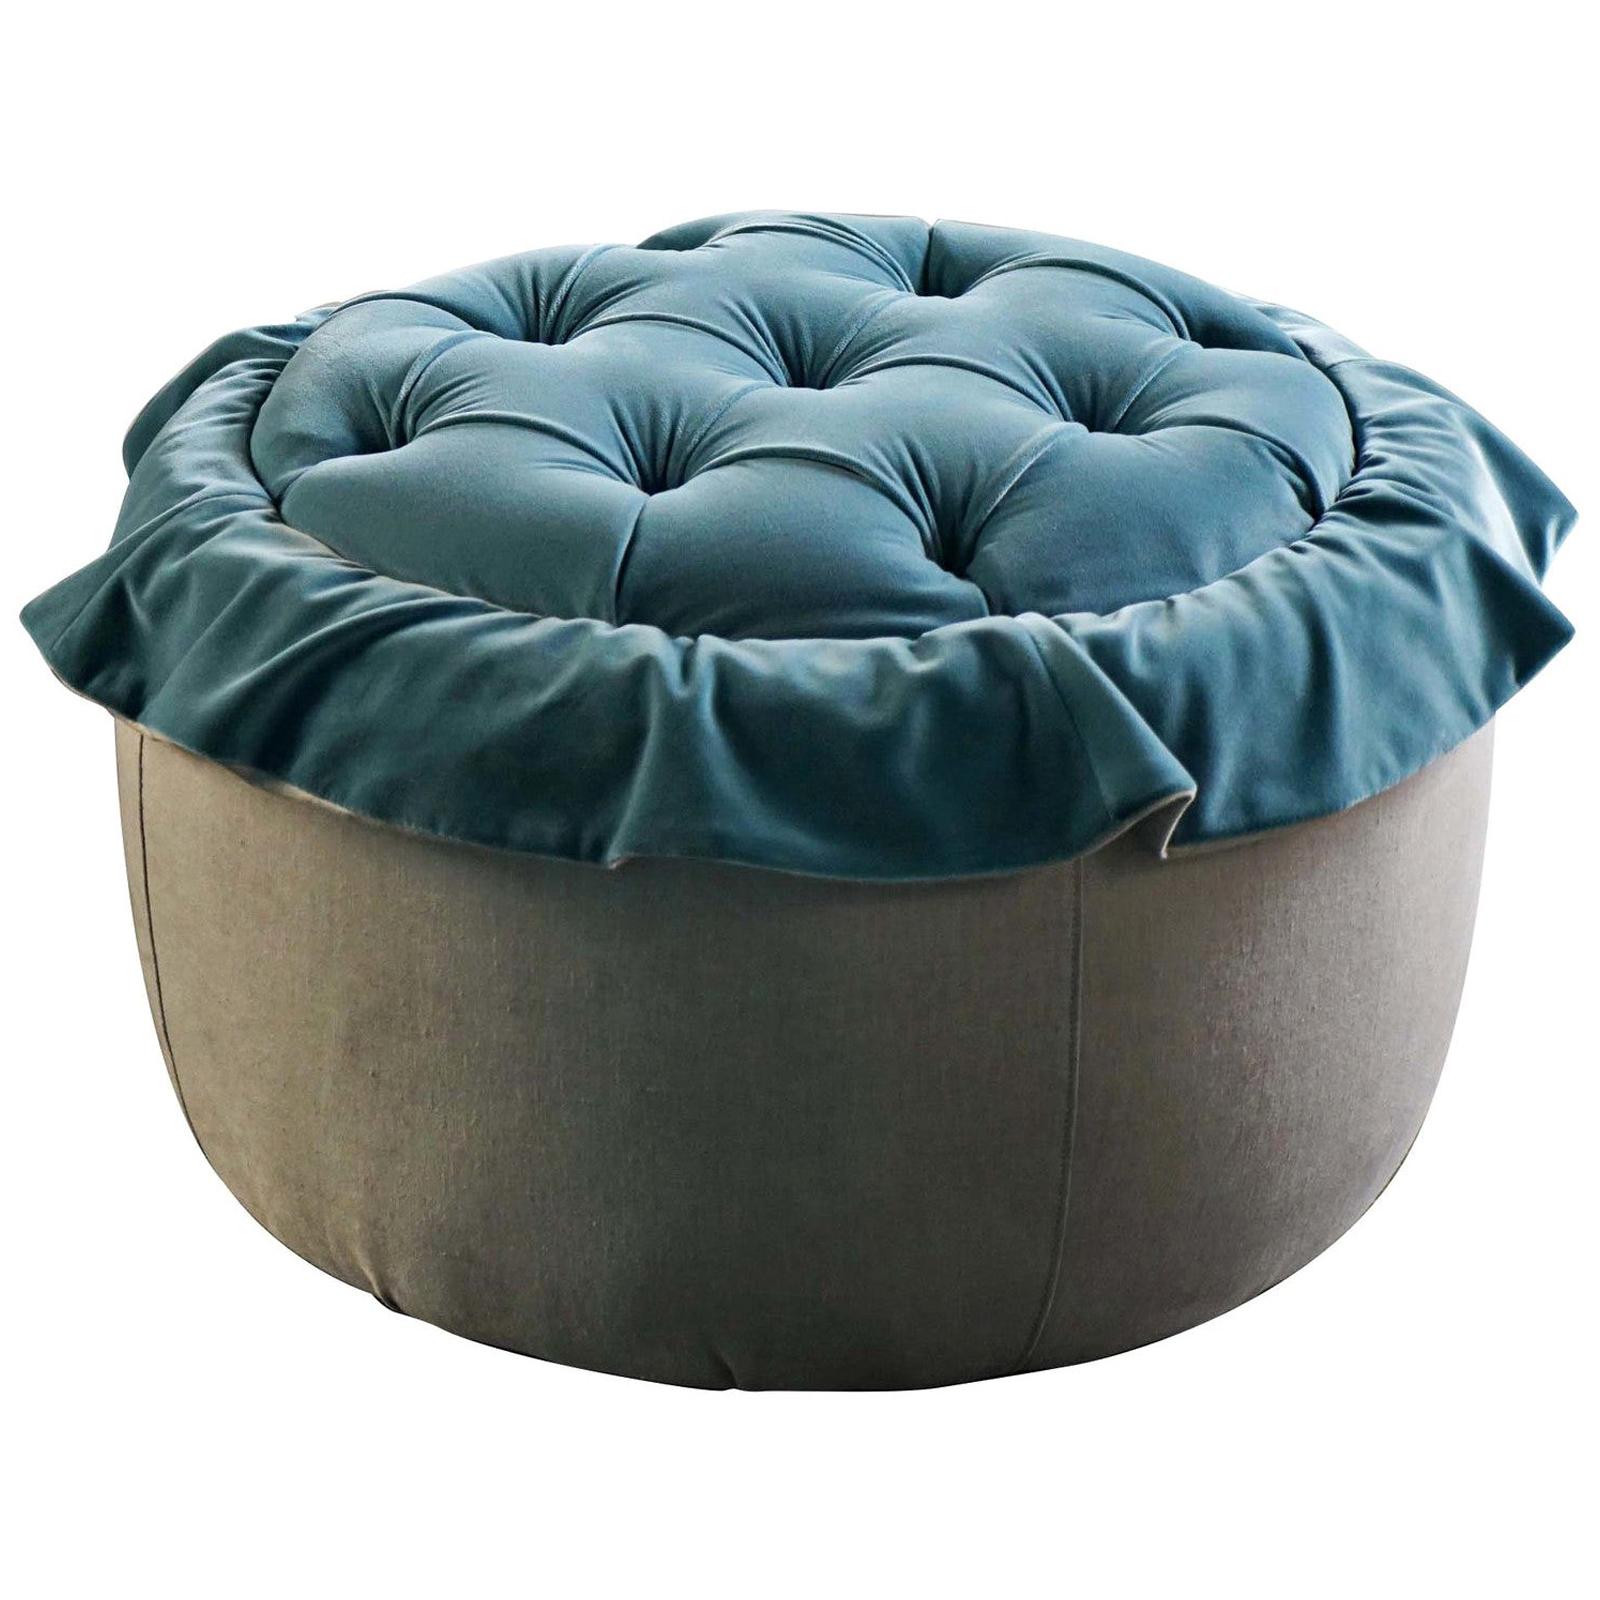 Pank Pouf by Andrea Vecera #2 For Sale at 1stDibs